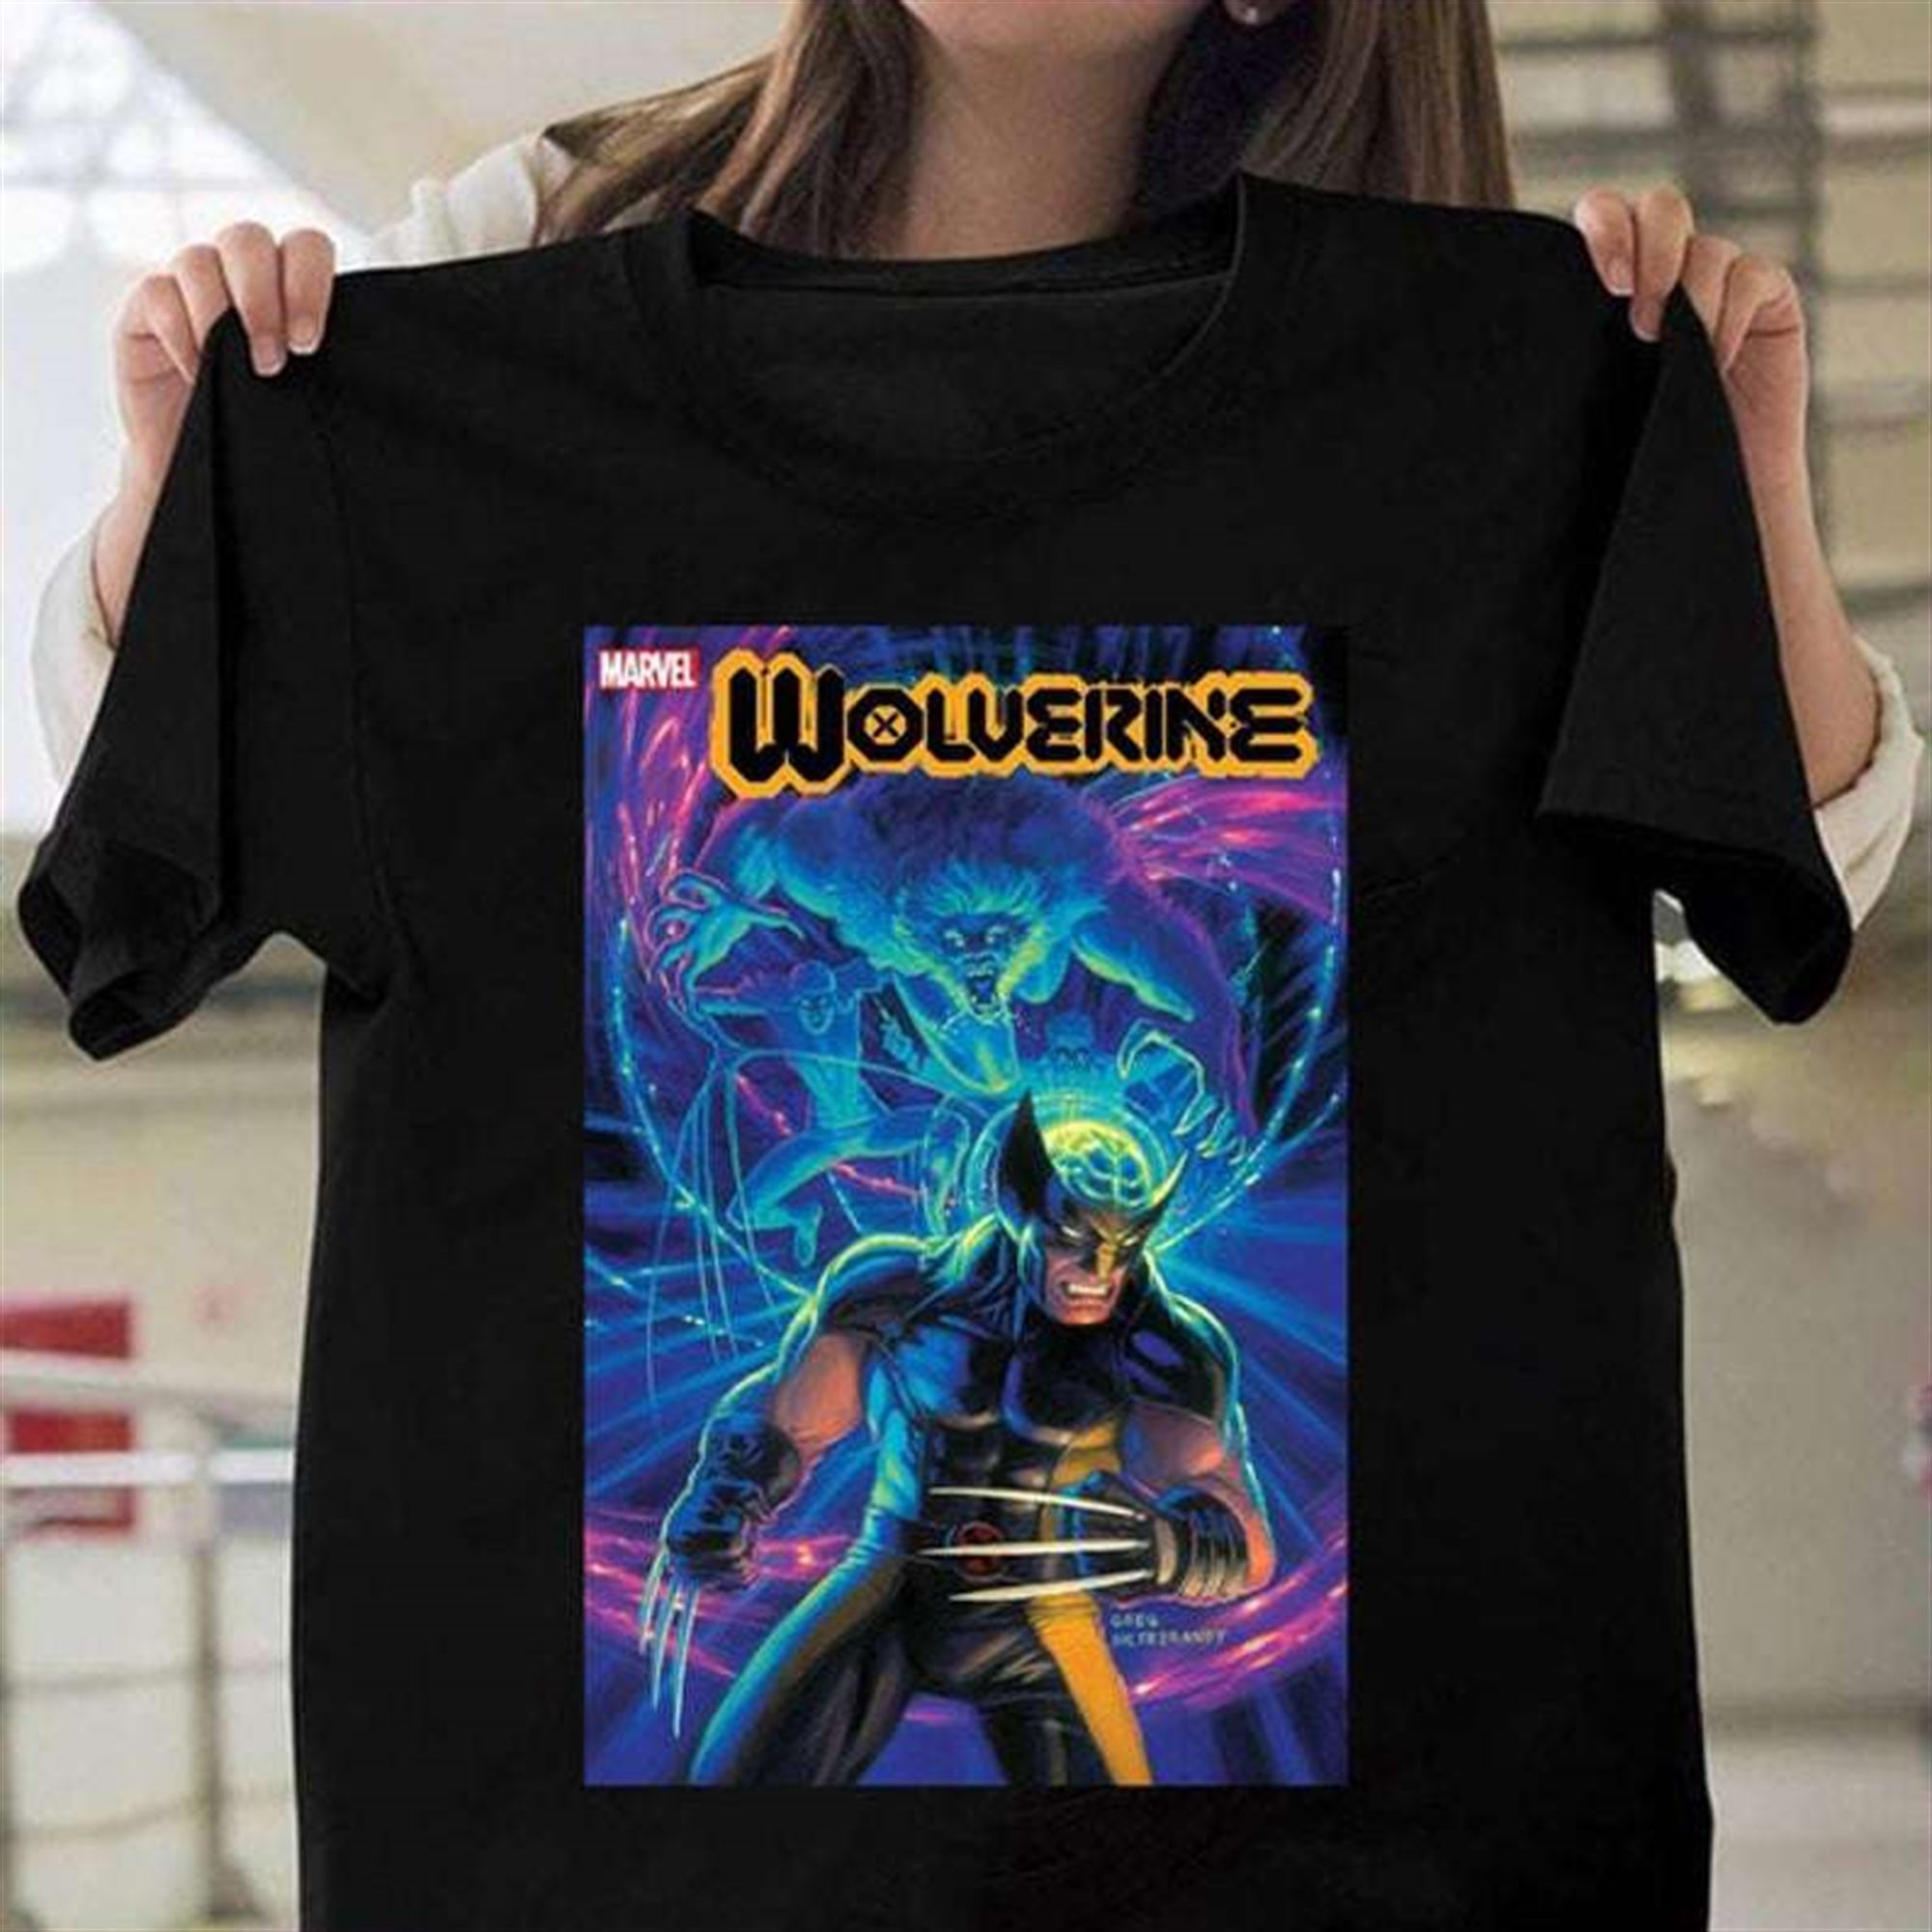 Marvel Wolverine Weapon X T Shirt Size Up To 5xl